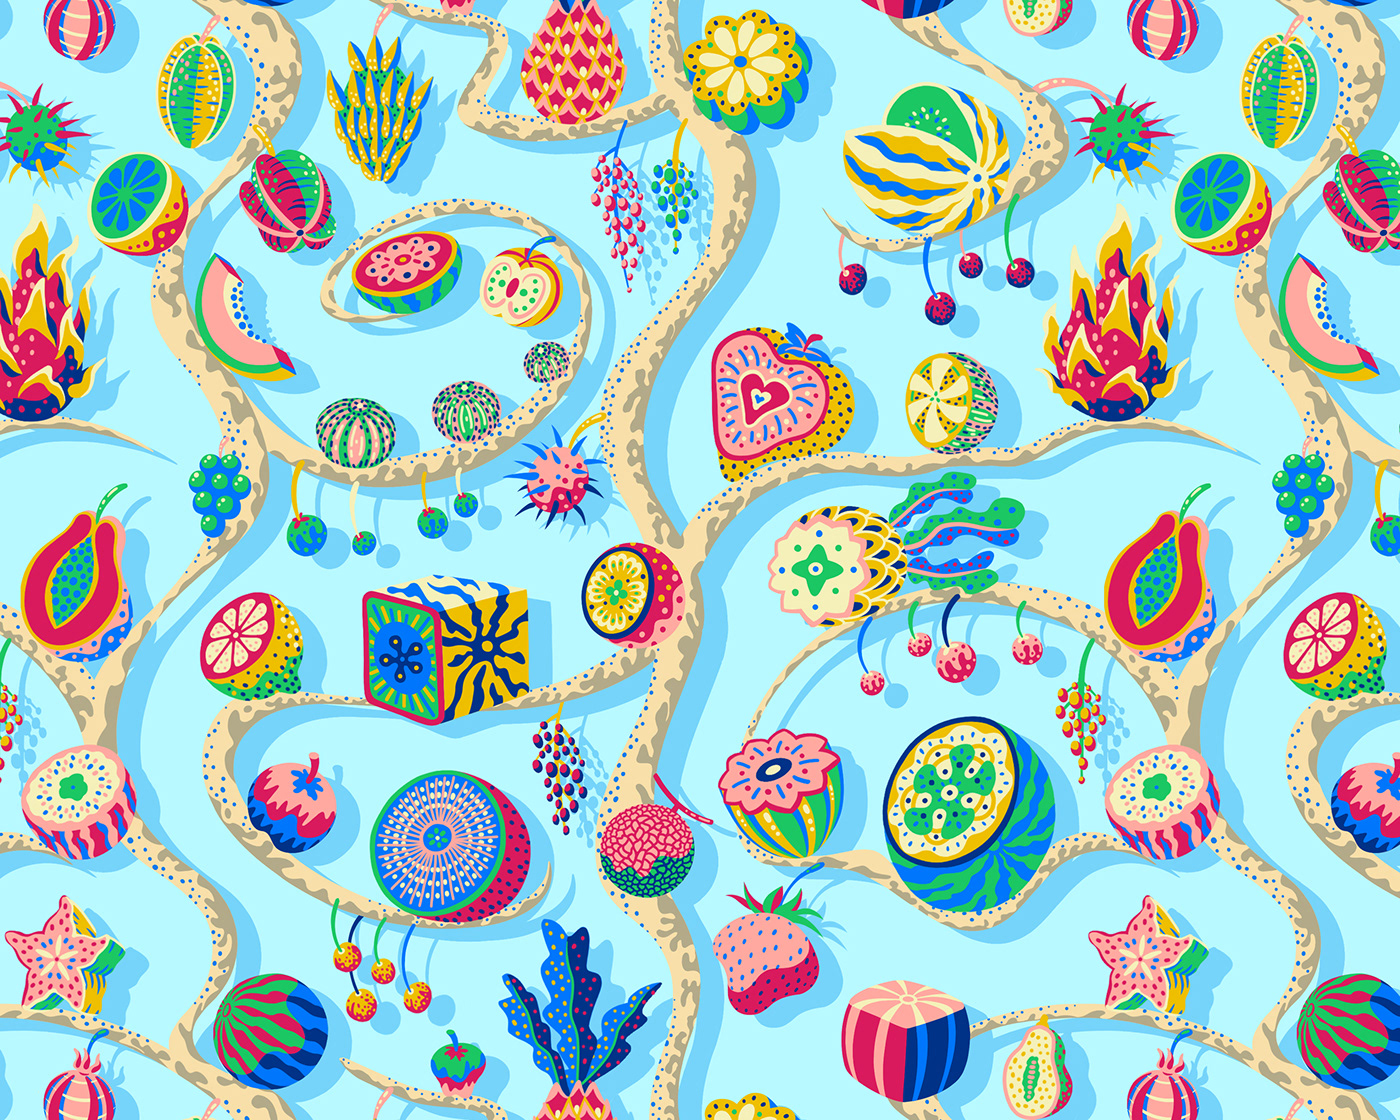 Digital illustration of a variety of fruits in a half-drop repeat pattern against a blue backdrop.